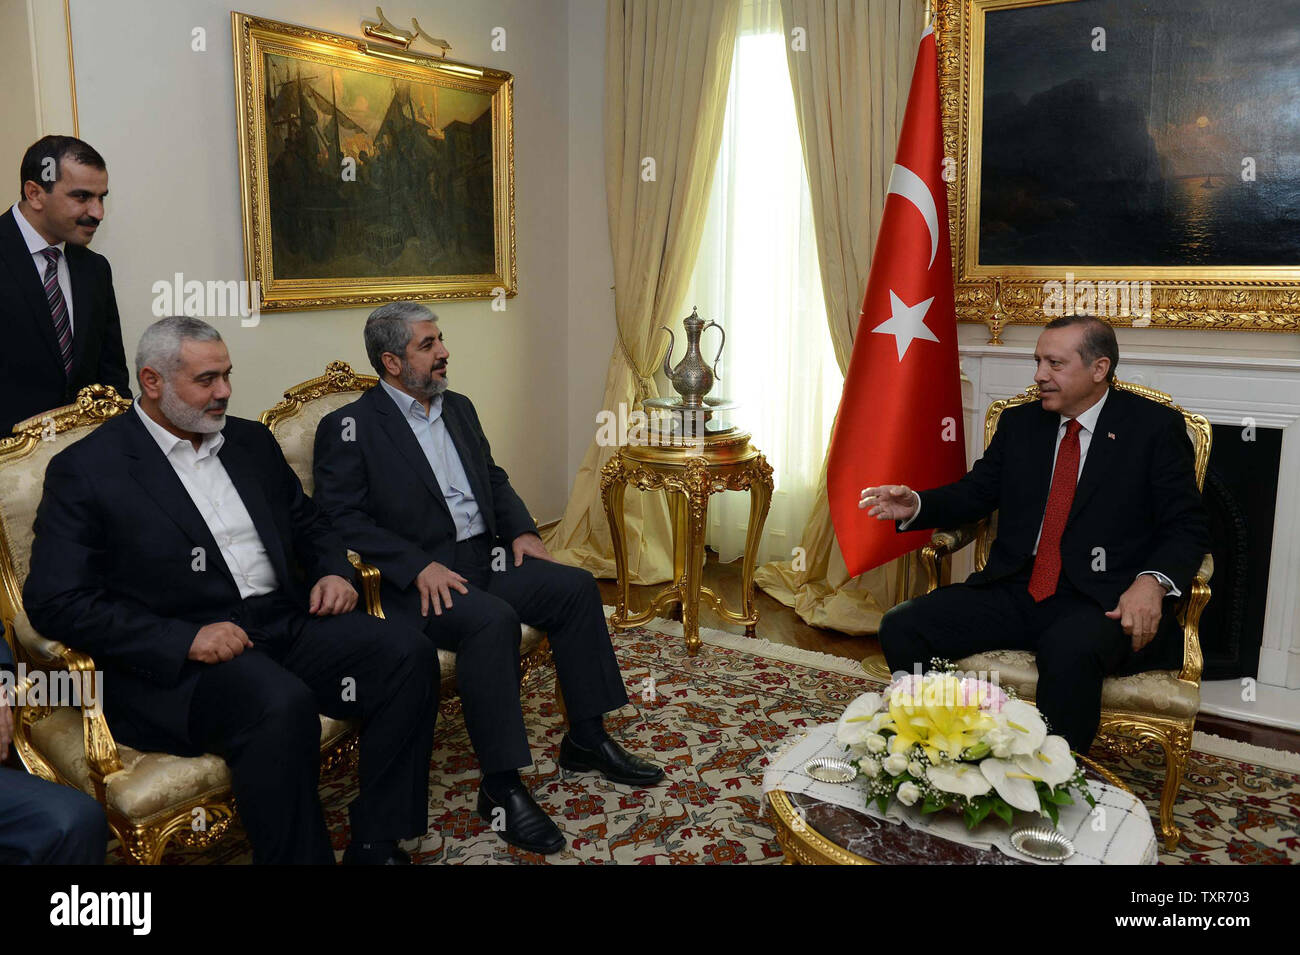 Turkish Prime Minister Recep Tayyip Erdogan (R) meets Khalid Mashaal (C), the Hamas chief in exile, and Gaza’s prime minister Ismail Haniyeh in Ankara, Turkey  on June 18, 2013. Senior leaders Hamas met today in Ankara with Erdogan to discuss Erdogan's planned visit to the Gaza Strip as well as the situation in Syria, the source said on condition of anonymity.    UPI/Palestinian PM Media Stock Photo